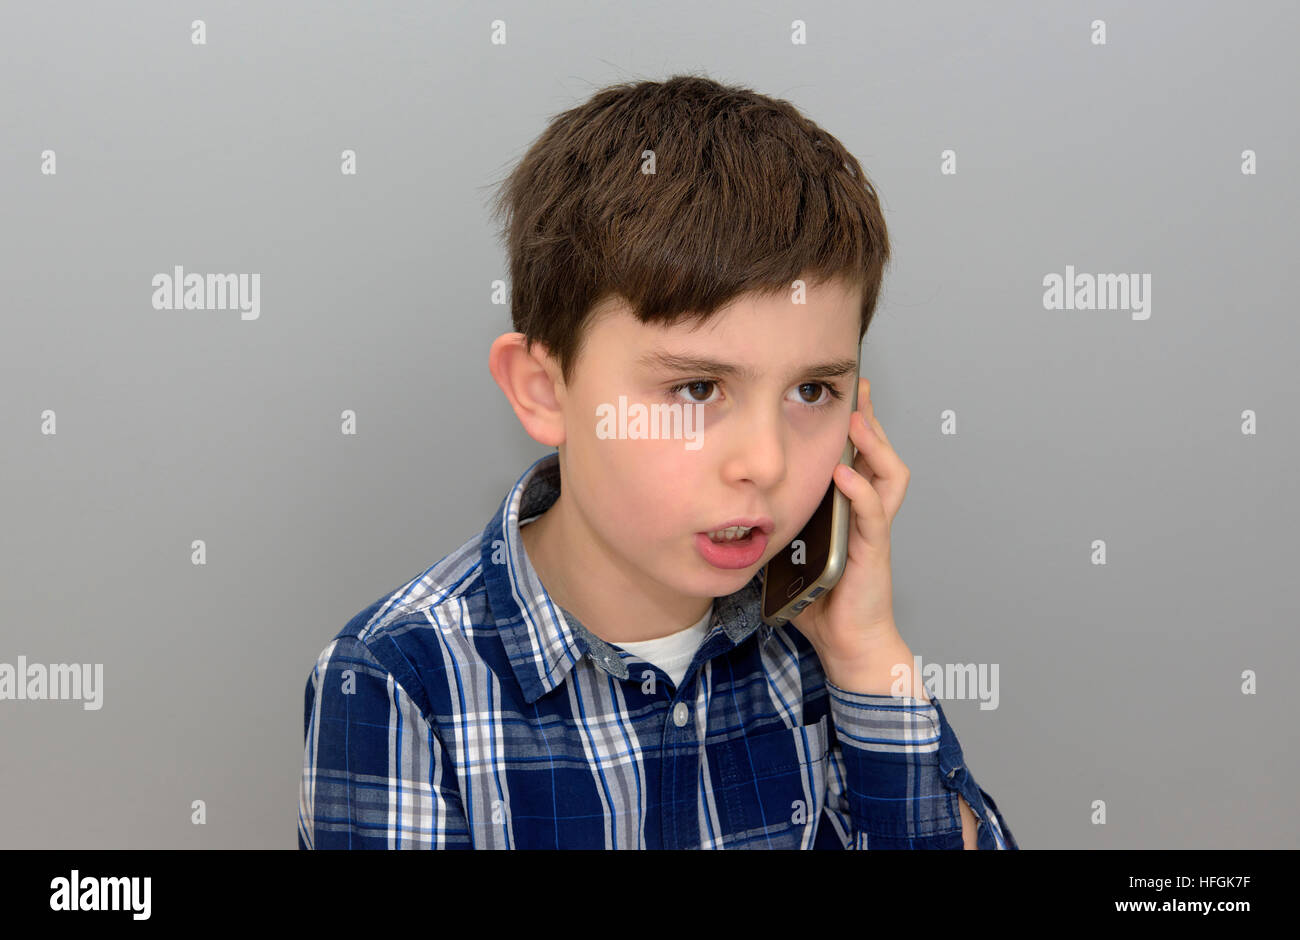 Close up portrait of child speaking on smart phone. Shot taken with grey background Stock Photo